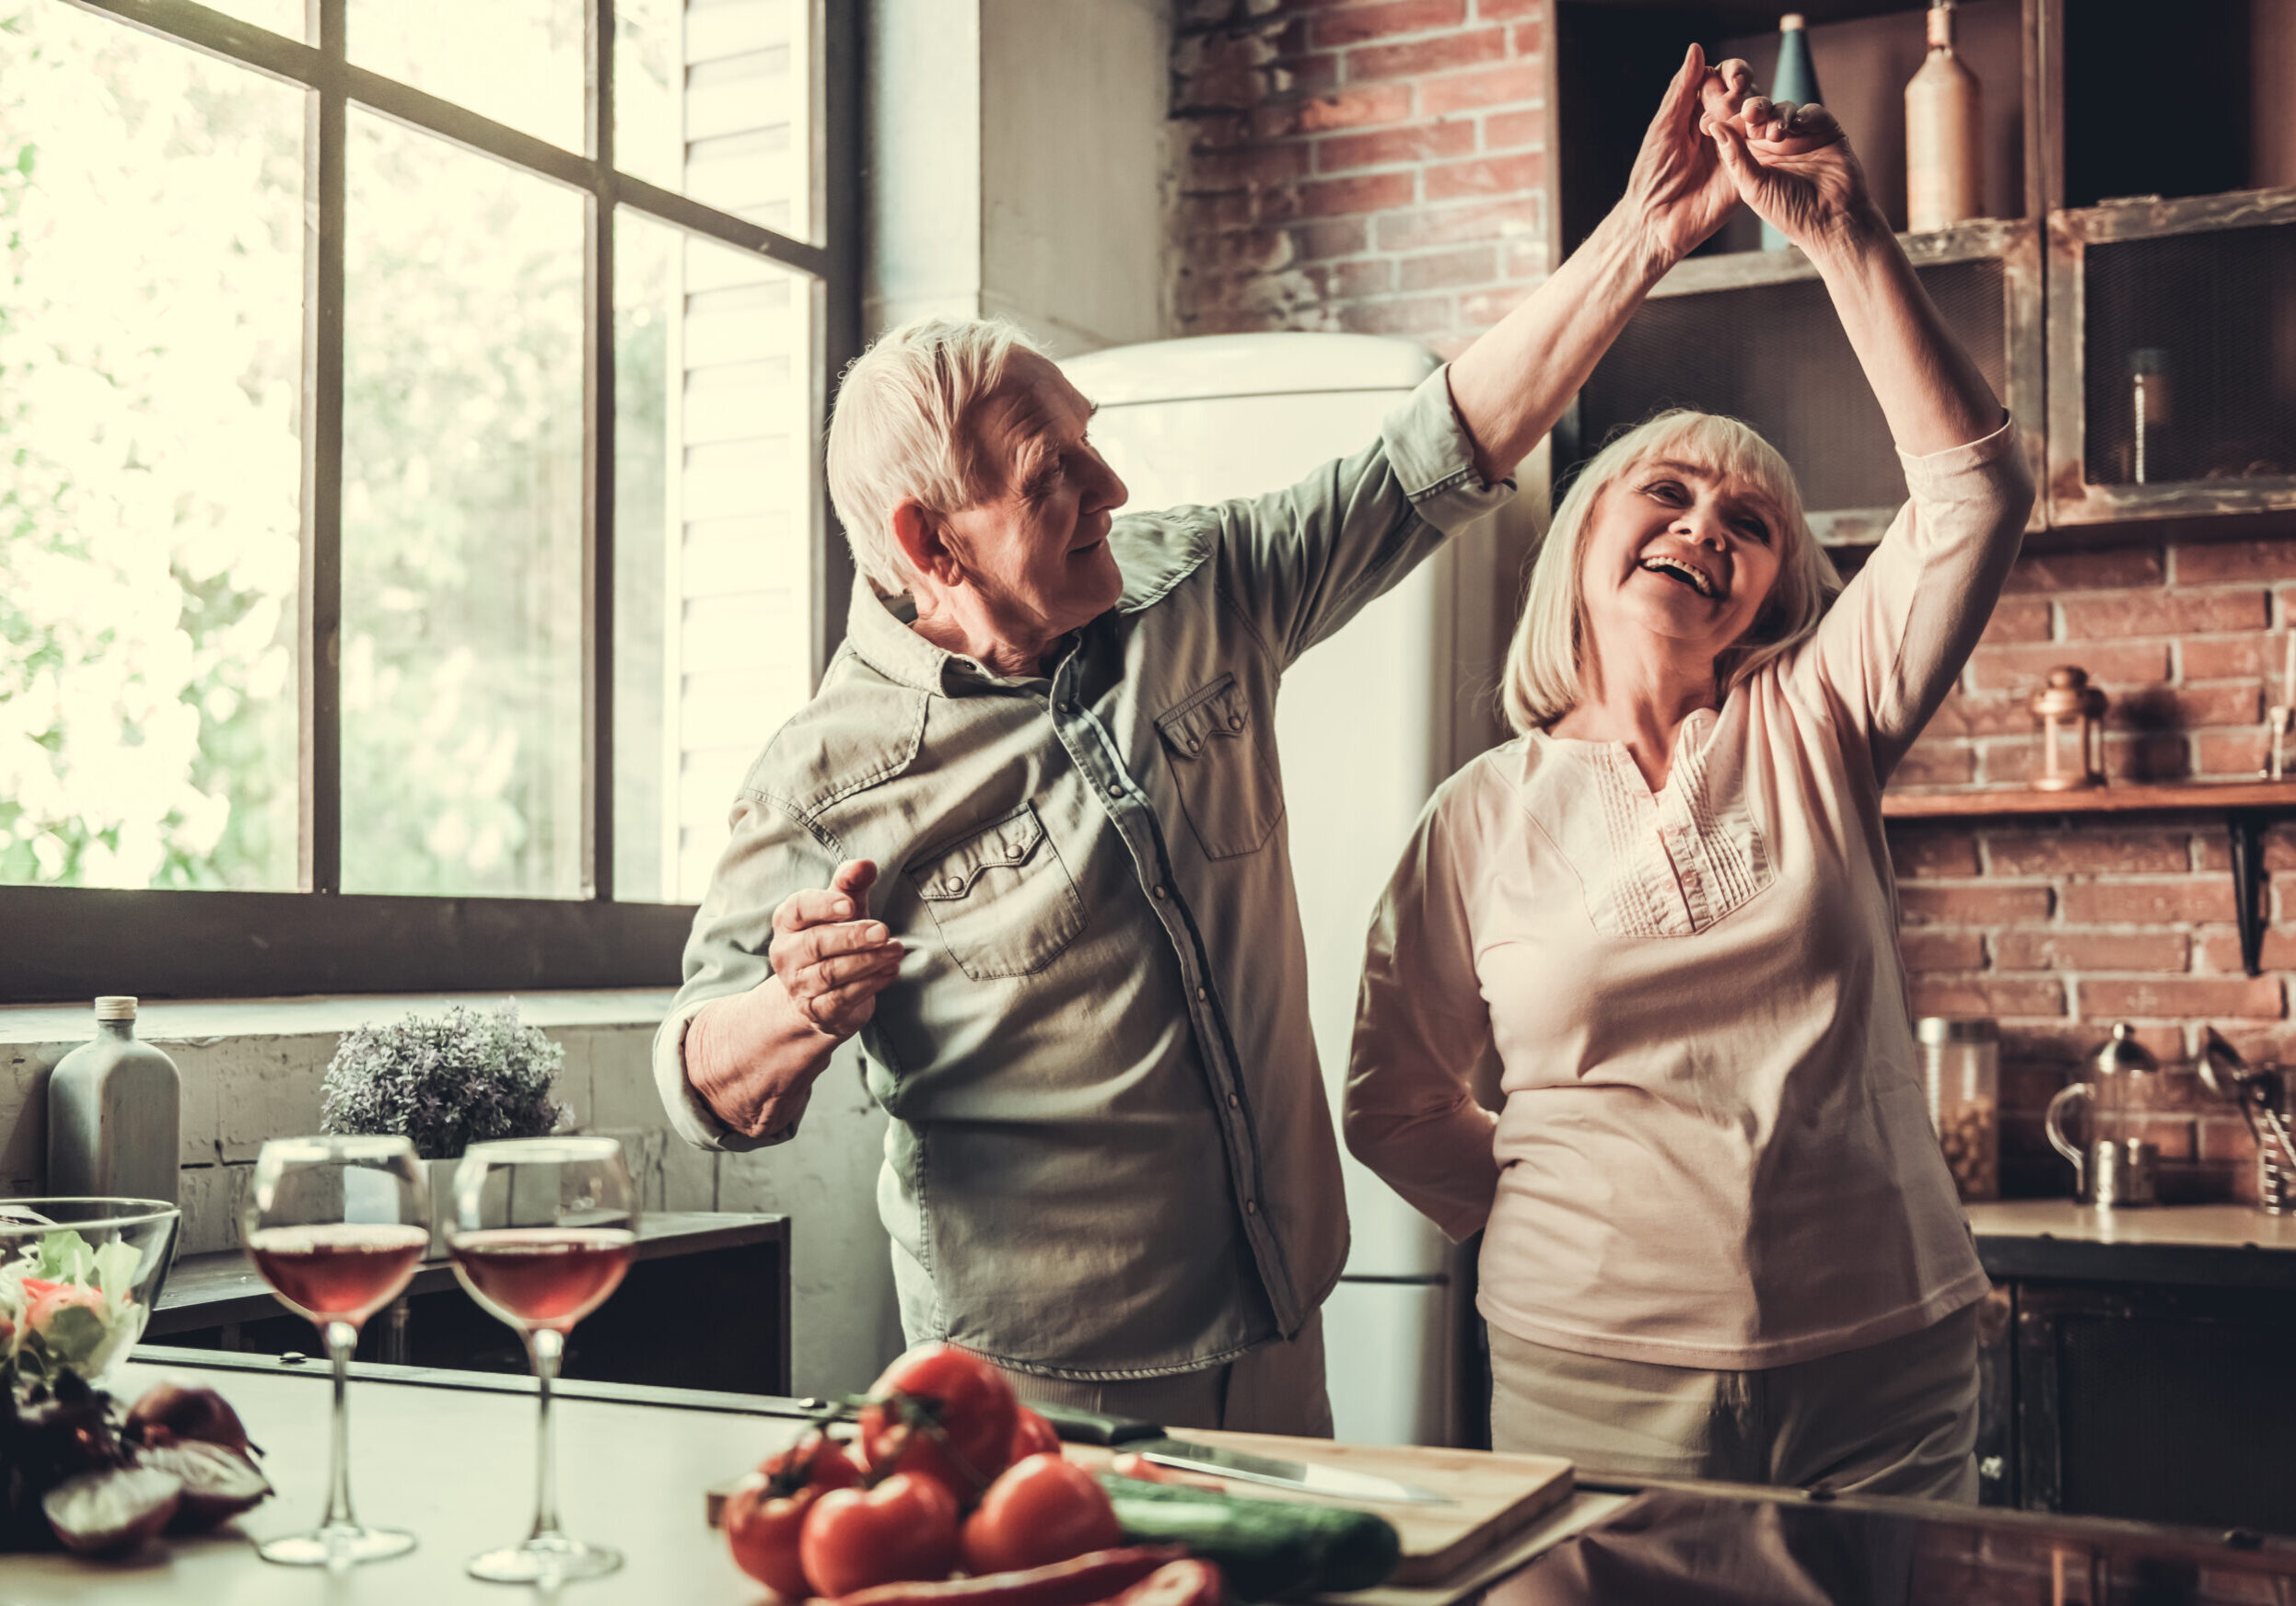 An older couple are dancing in their kitchen.